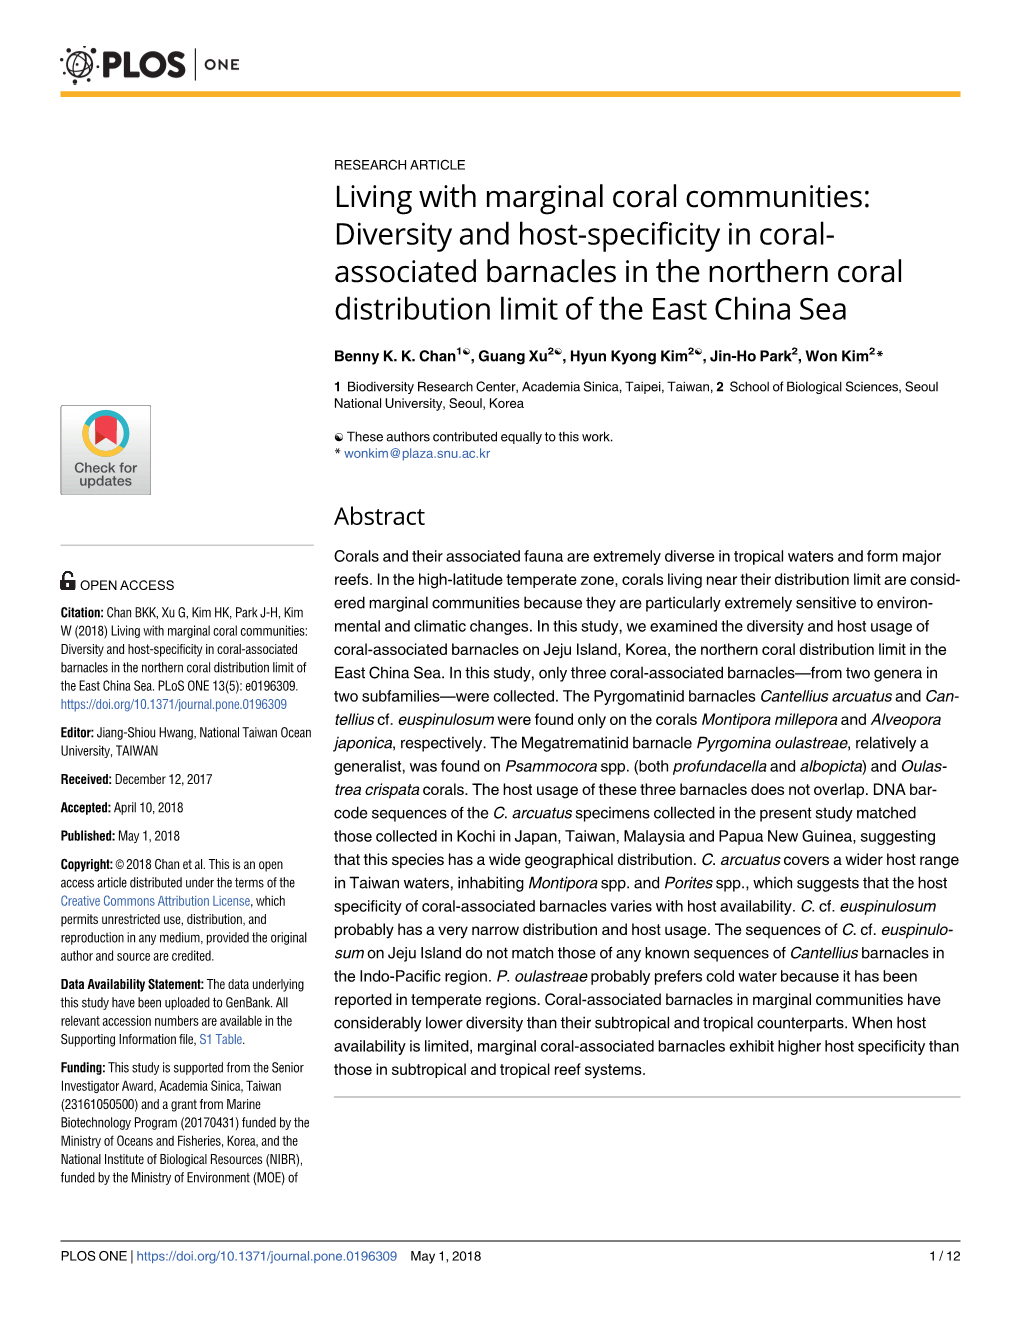 Diversity and Host-Specificity in Coral-Associated Barnacles in The